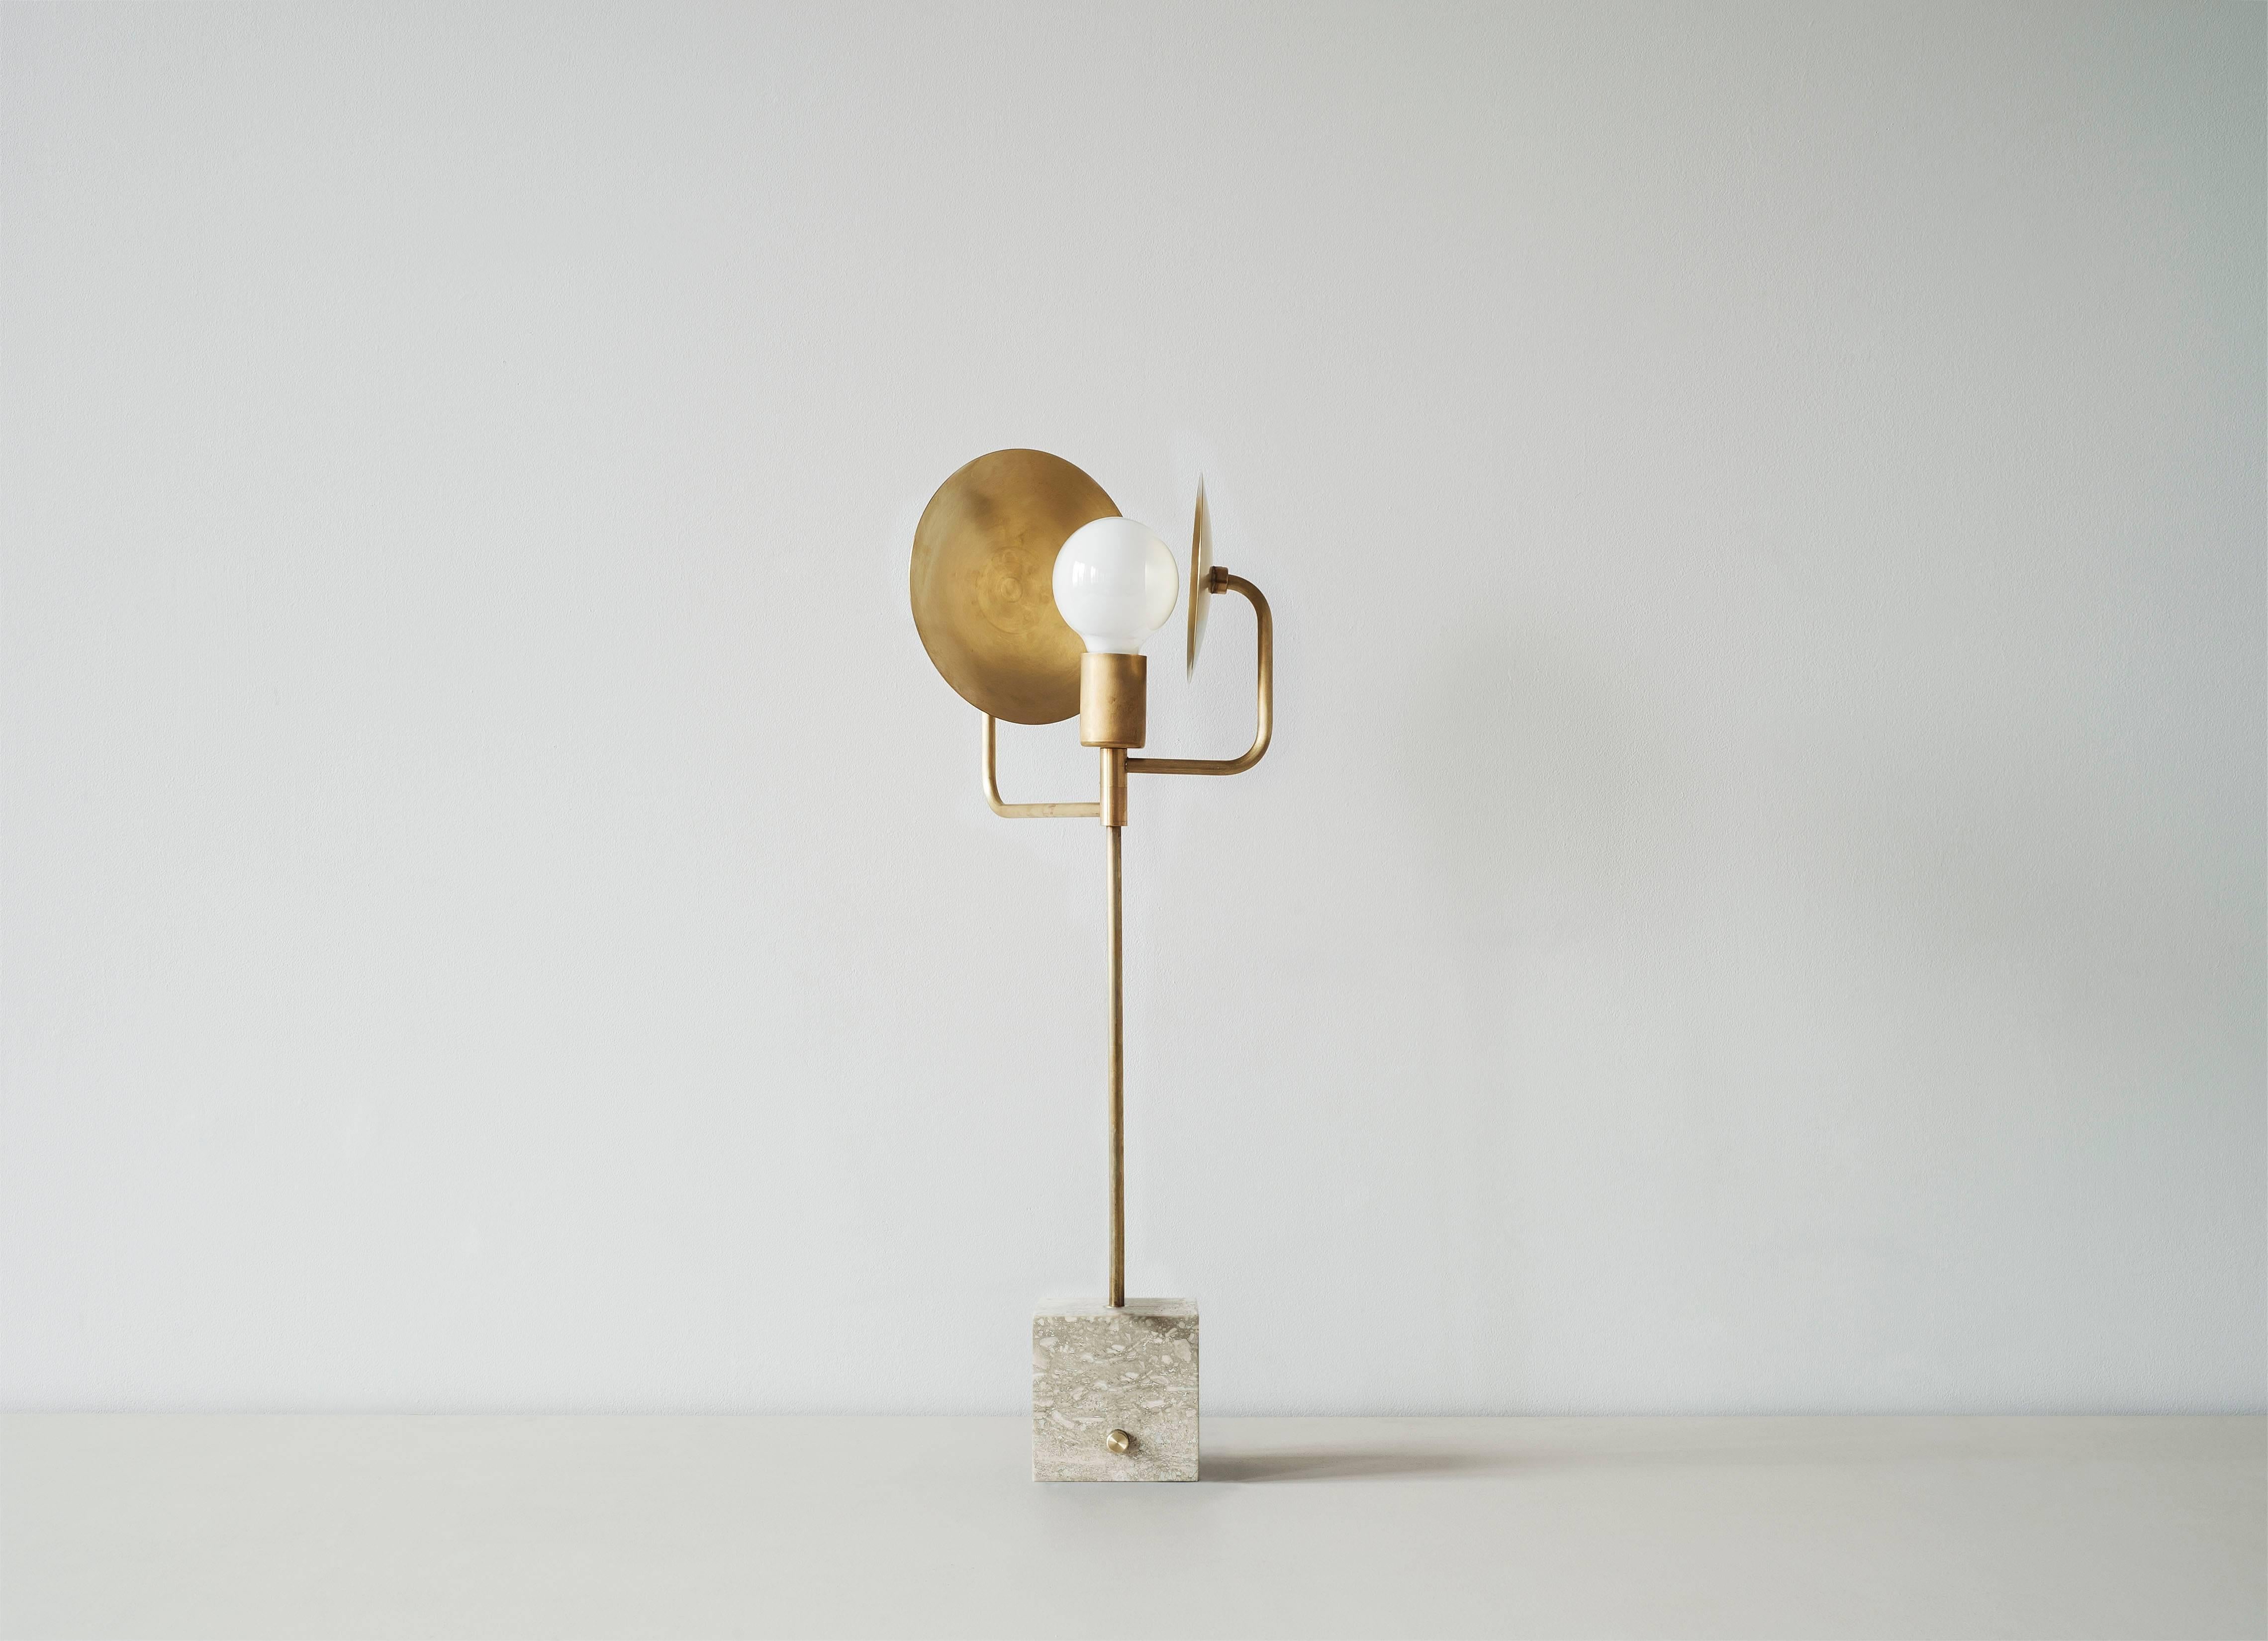 This table lamp features two spun brass discs which orbits like planets around a stationary bulb. With a base available in two varieties of stone, it is a grounded yet flexible piece for the tabletop. It can be arranged in a variety of